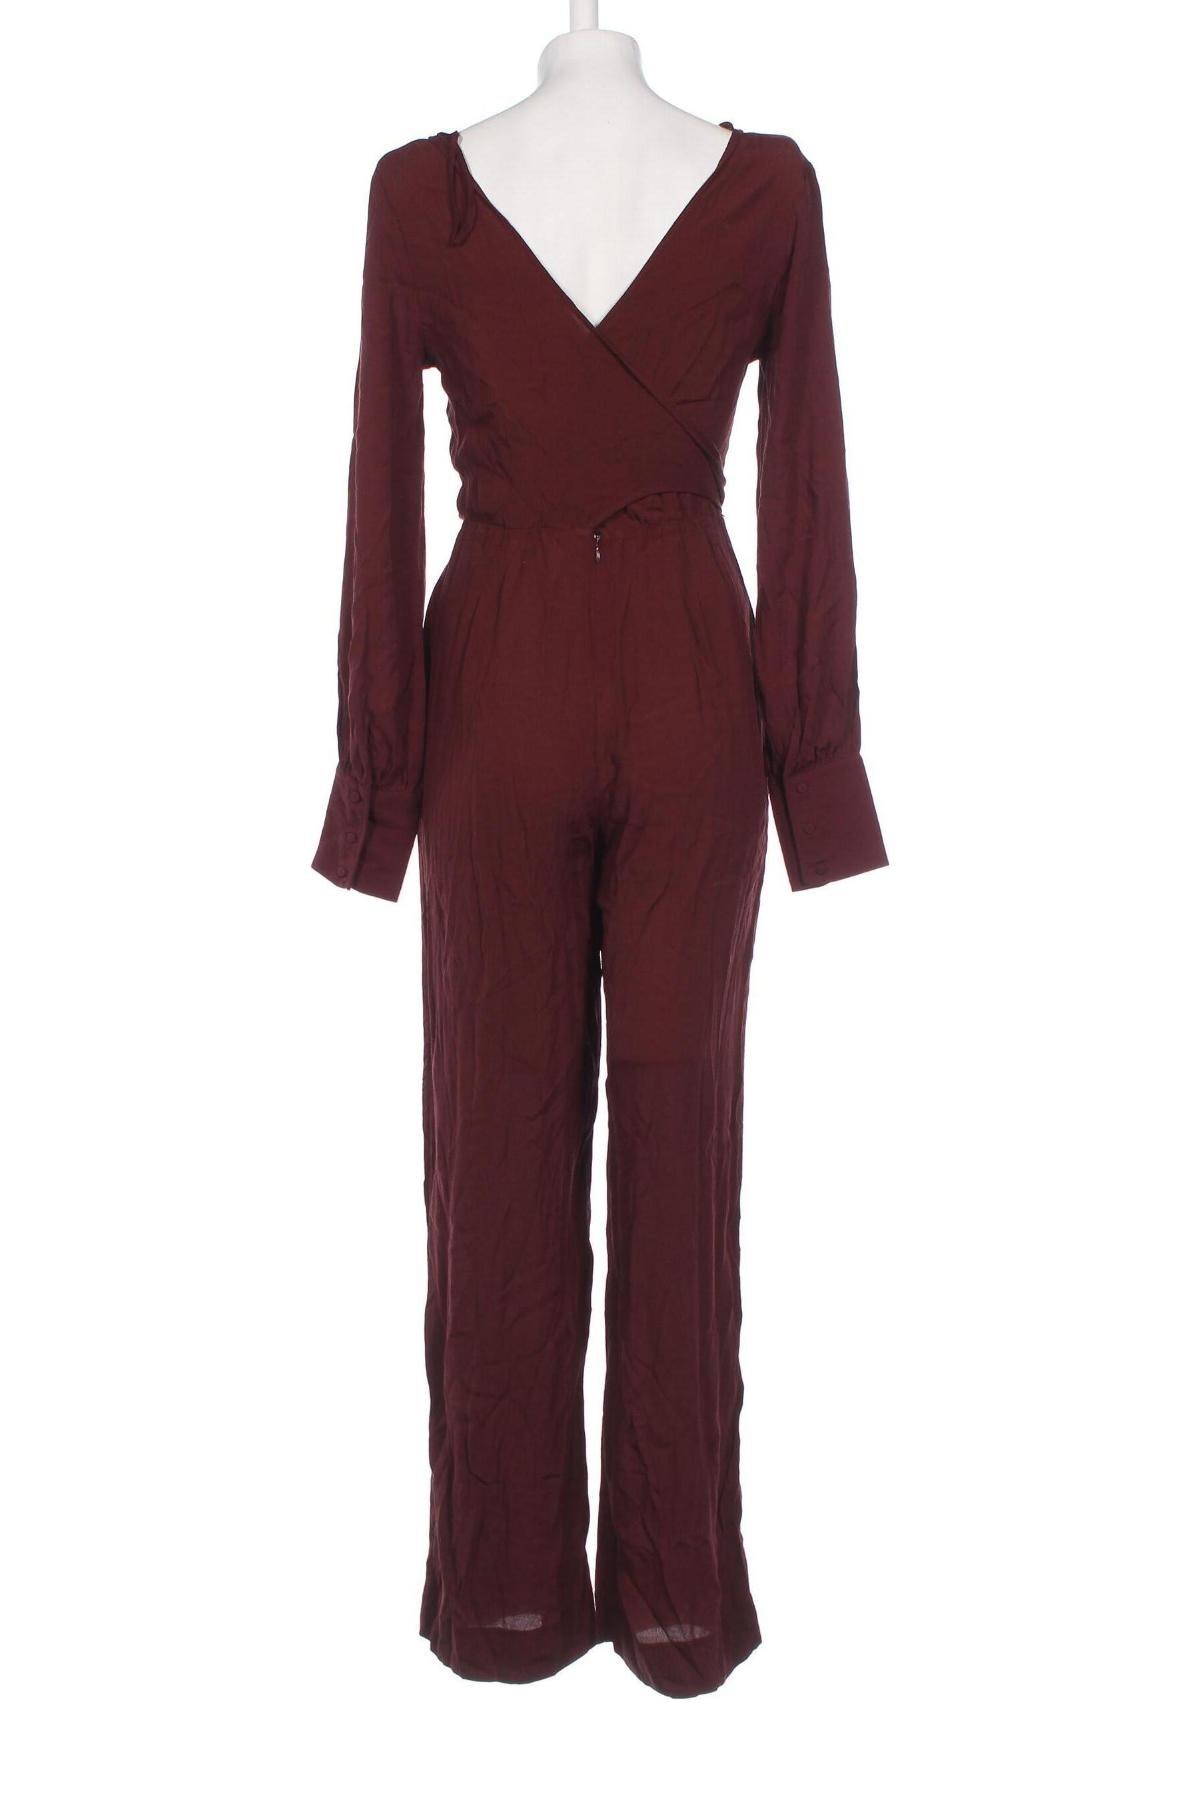 Damen Overall & Other Stories, Größe S, Farbe Rot, Preis 41,86 €